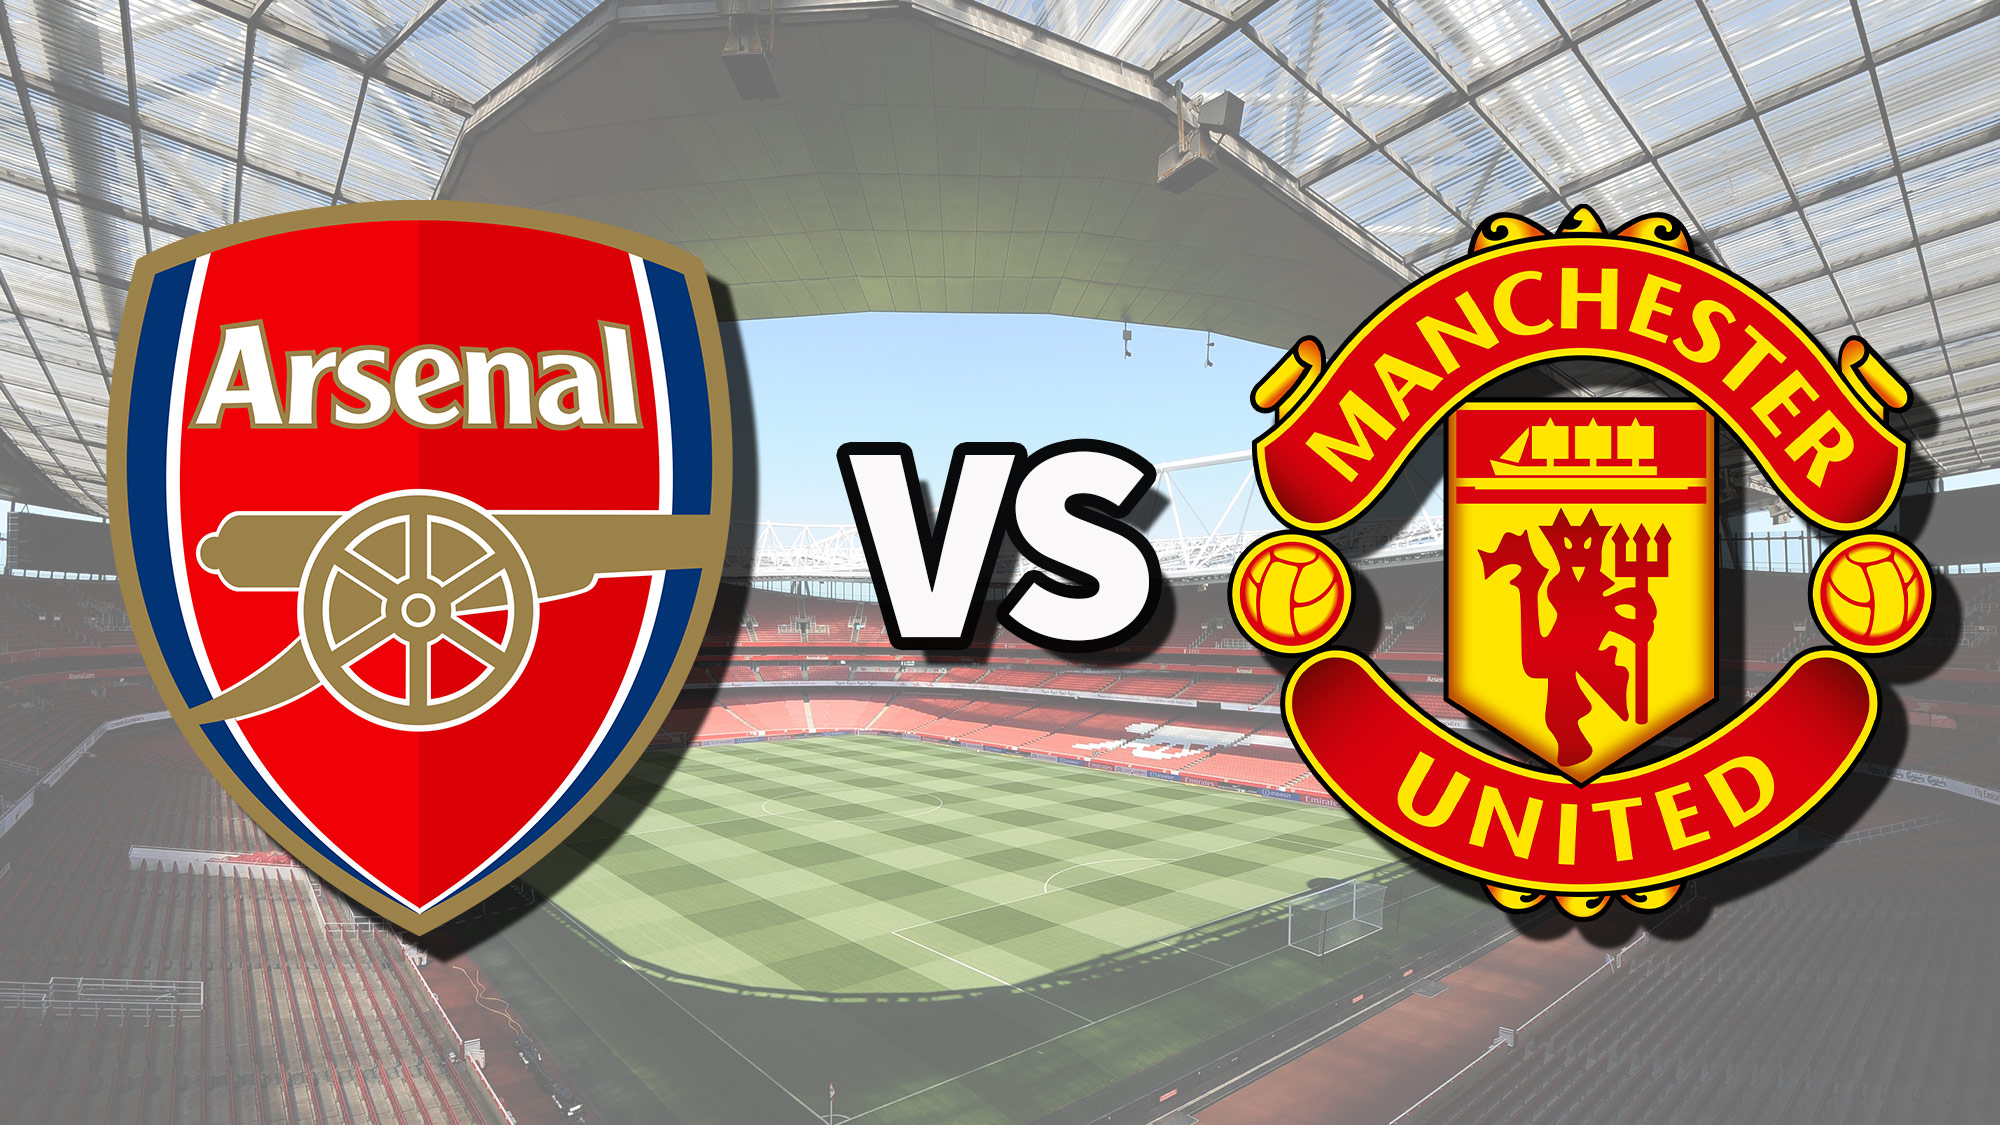 Arsenal vs Man Utd live stream: How to watch Premier League game online |  Tom's Guide